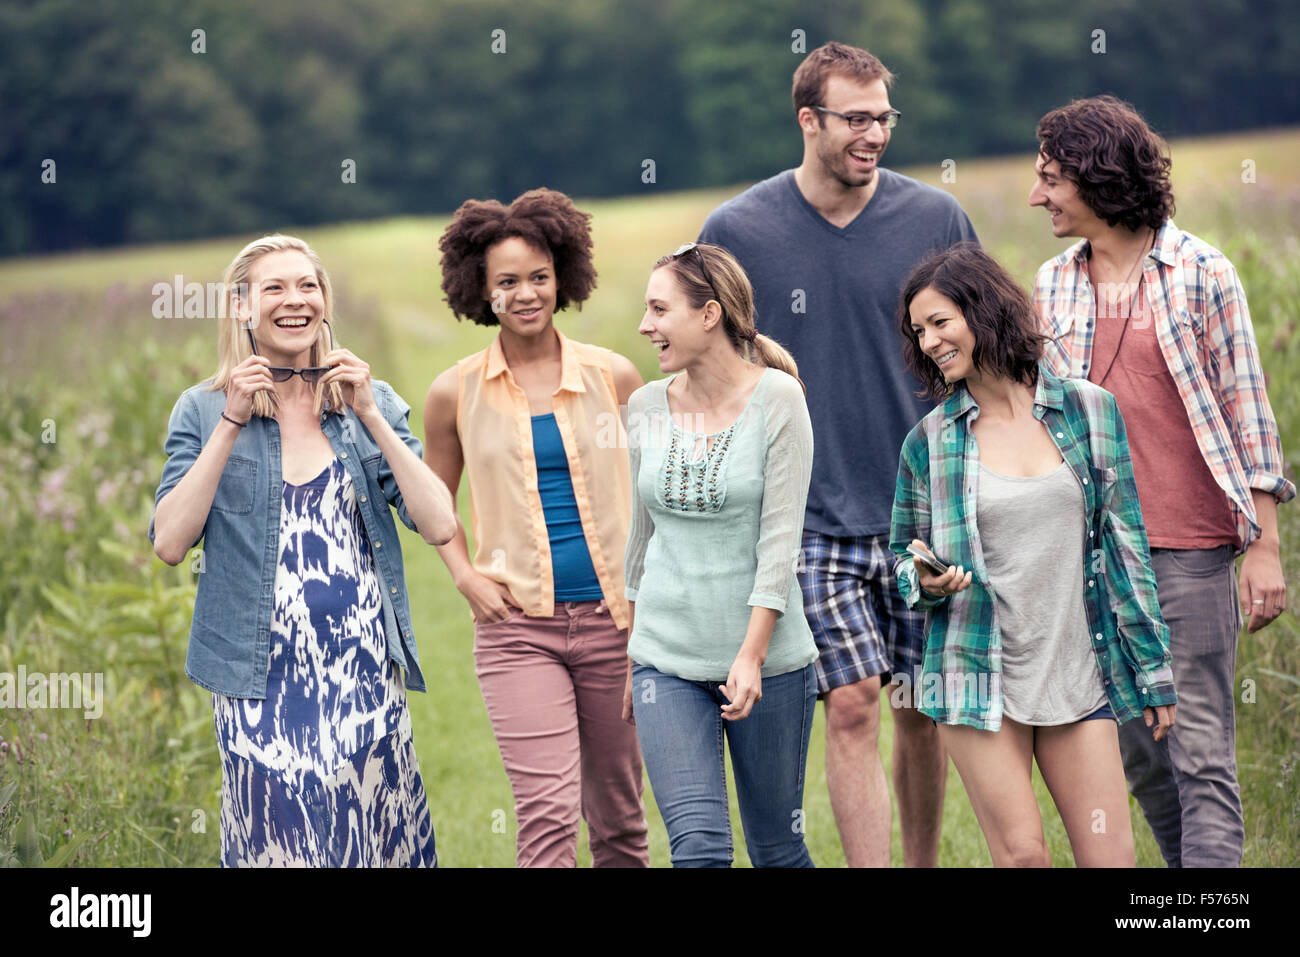 A group of people, a man and five women, walking through the countryside. Stock Photo